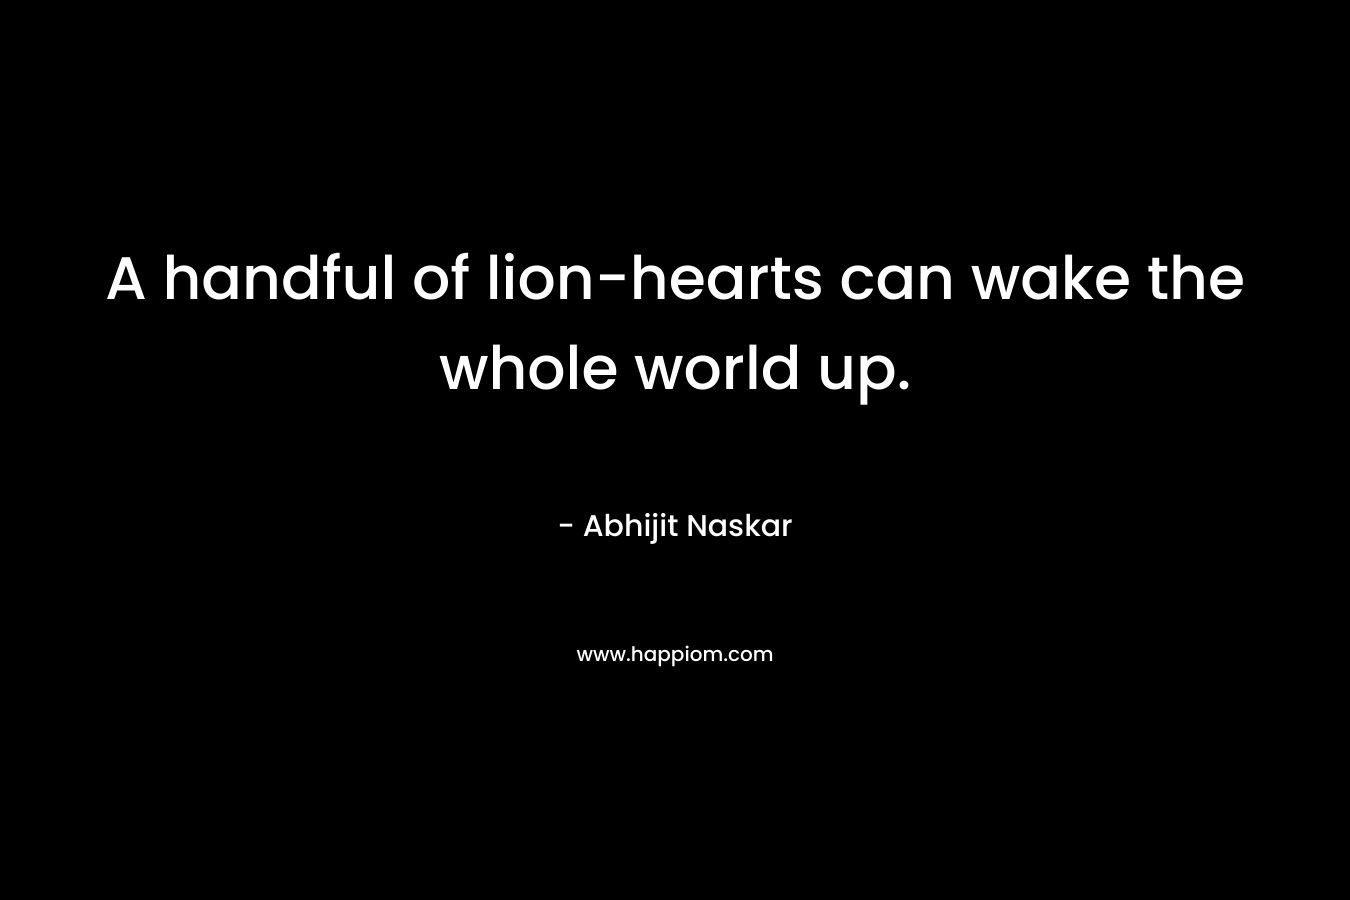 A handful of lion-hearts can wake the whole world up.